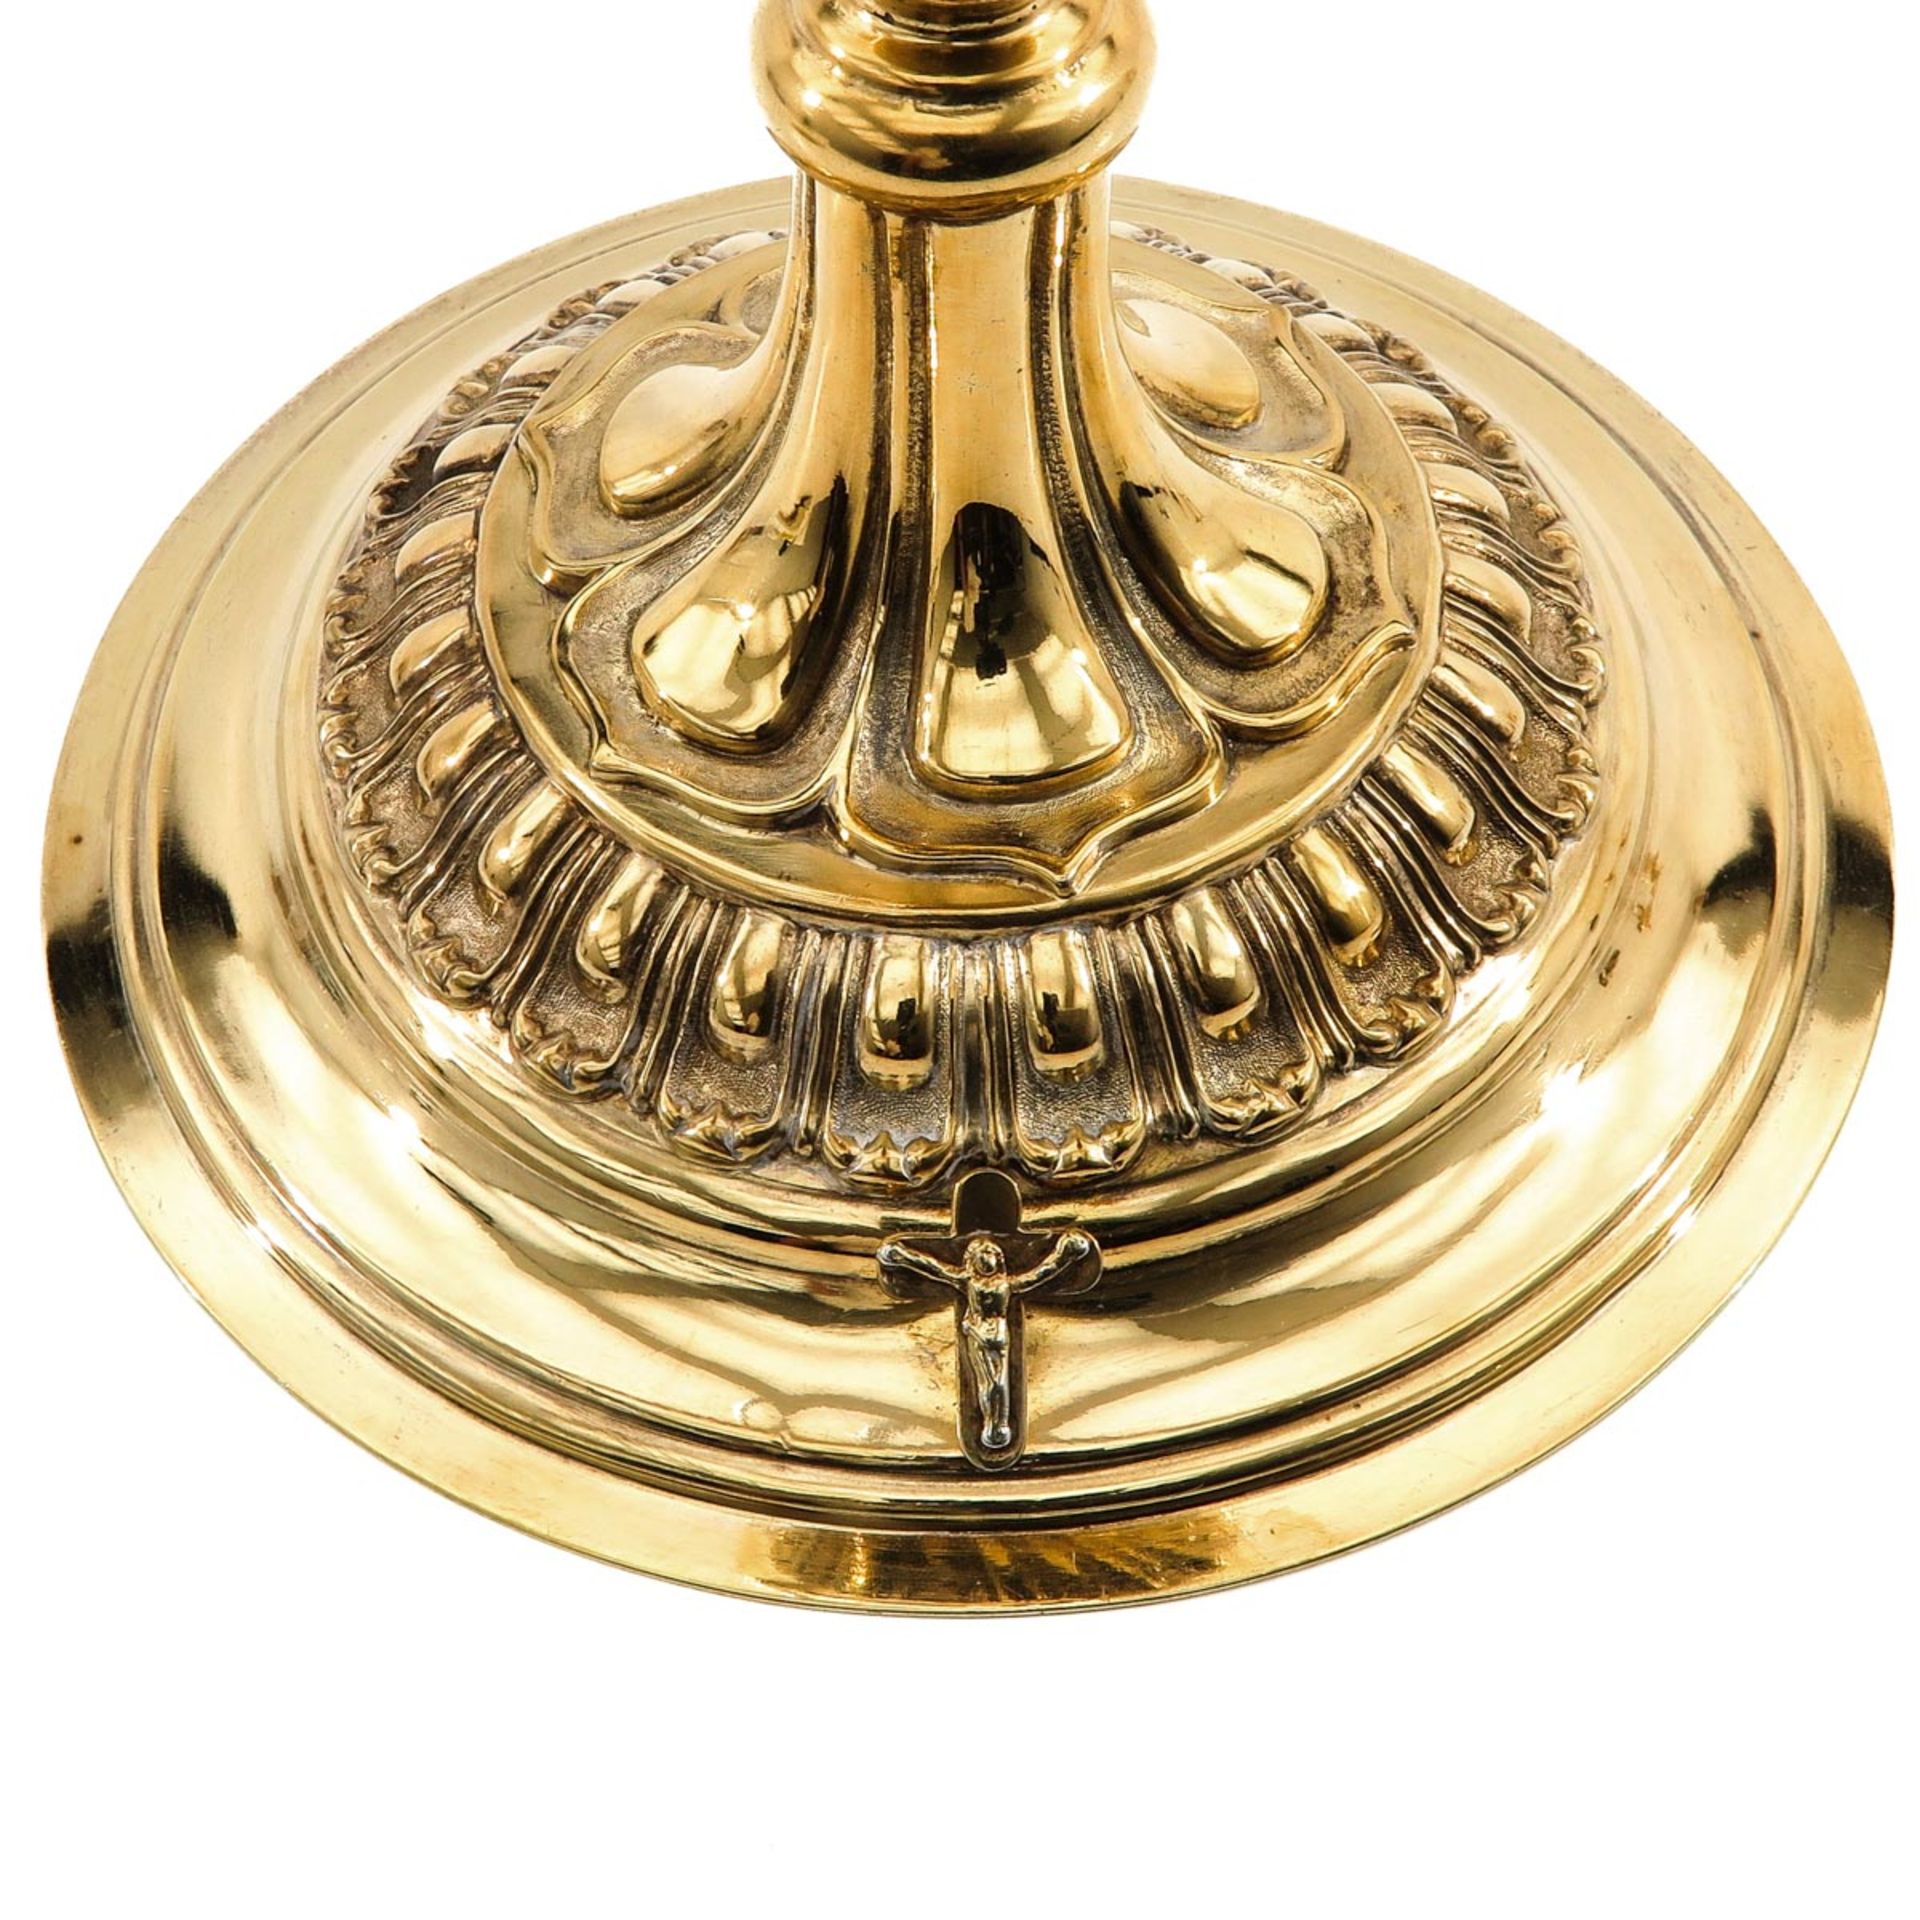 A Gold Plated Silver Chalice with Paten and Spoon - Image 10 of 10